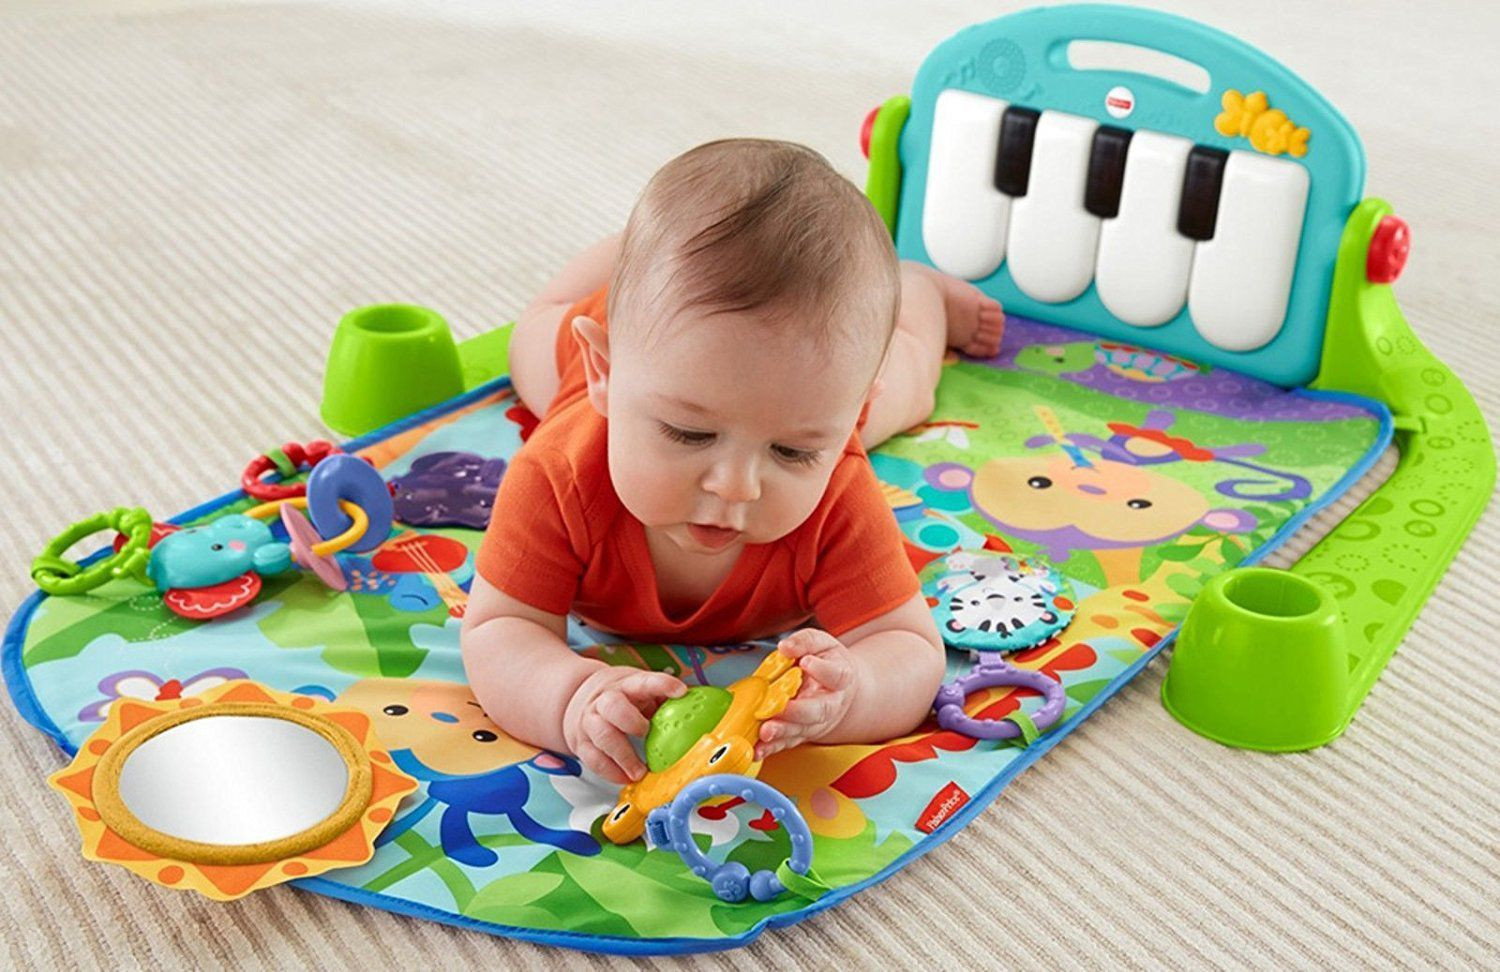 Coolest Baby Gifts 2015
 The 34 Best Baby Gifts of 2020